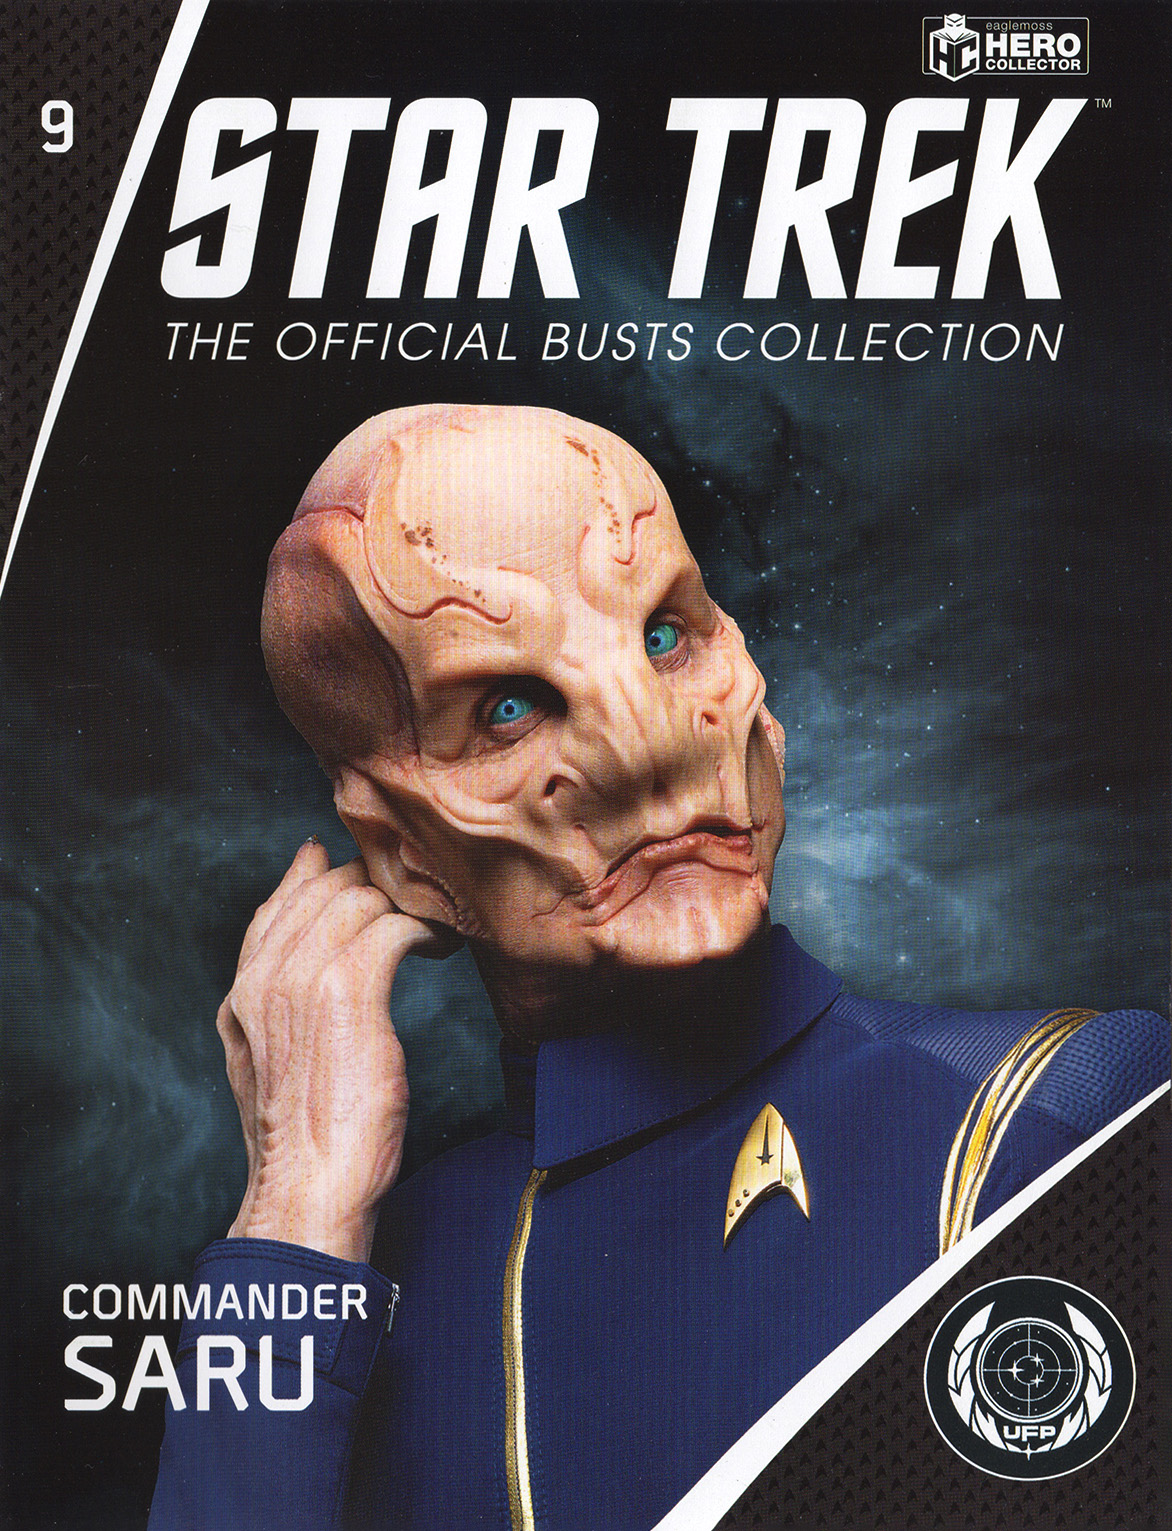 Star Trek: The Official Busts Collection #9.jpg